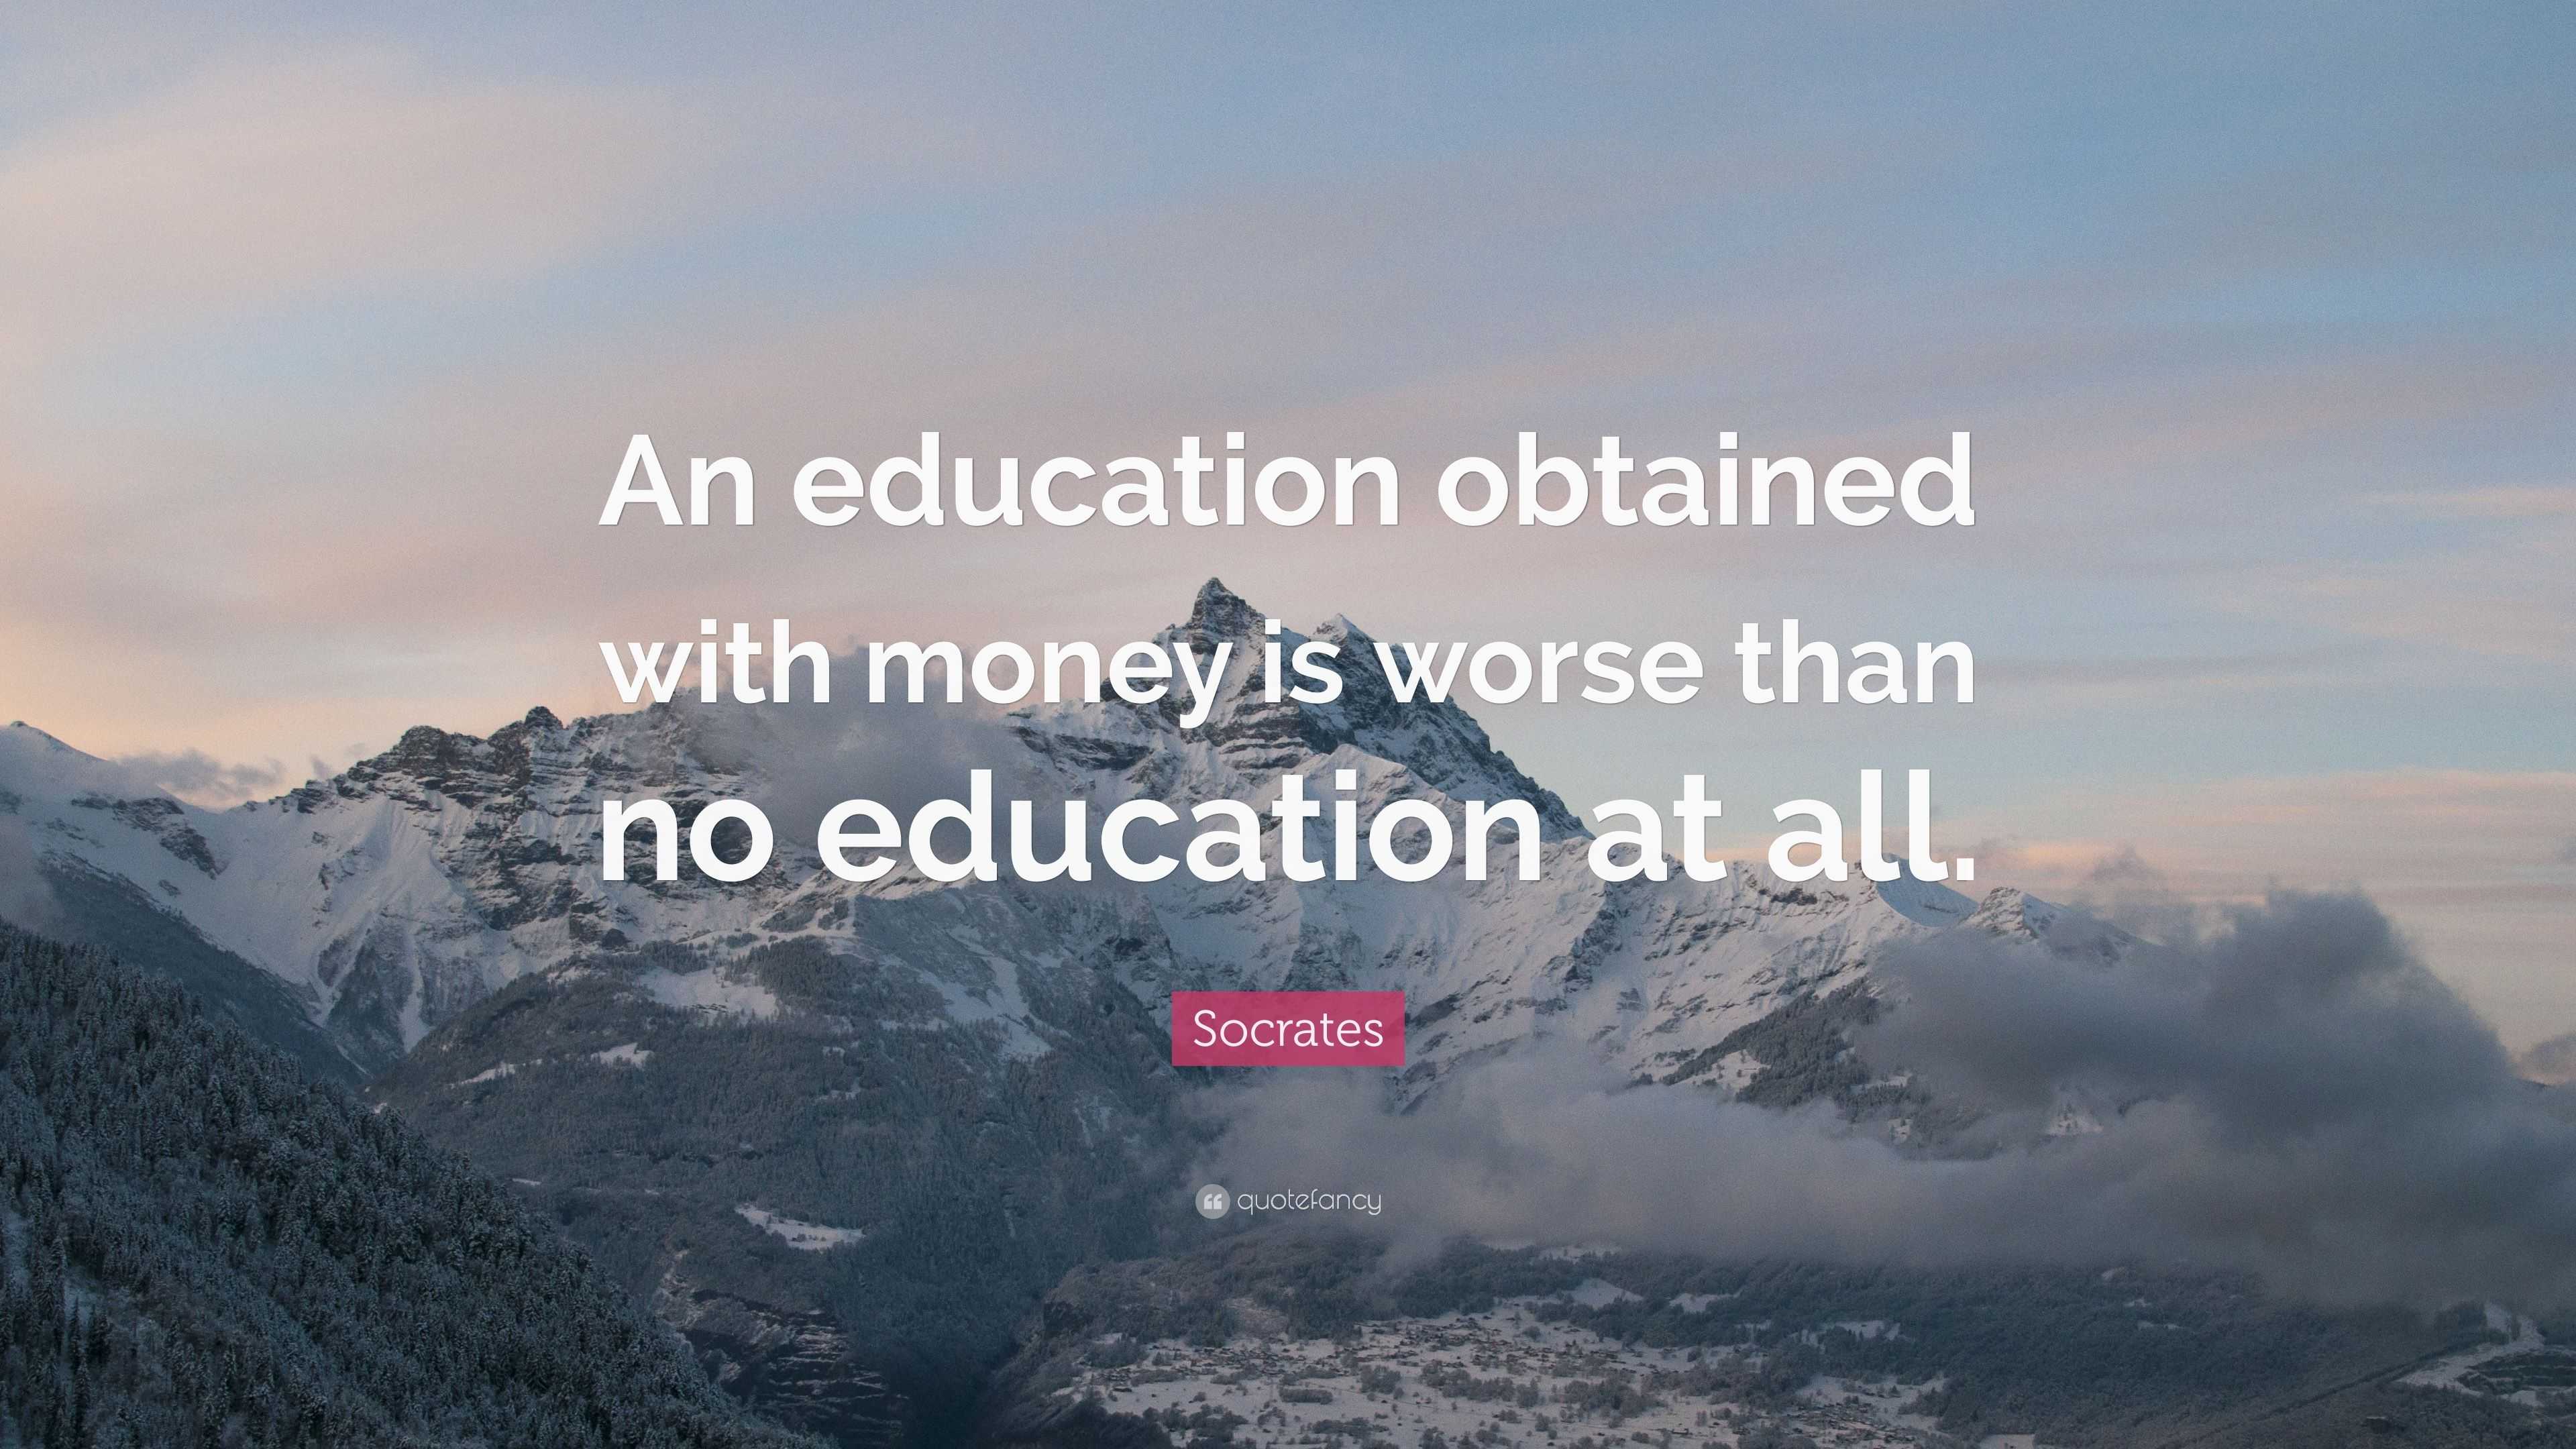 socrates quotes on education